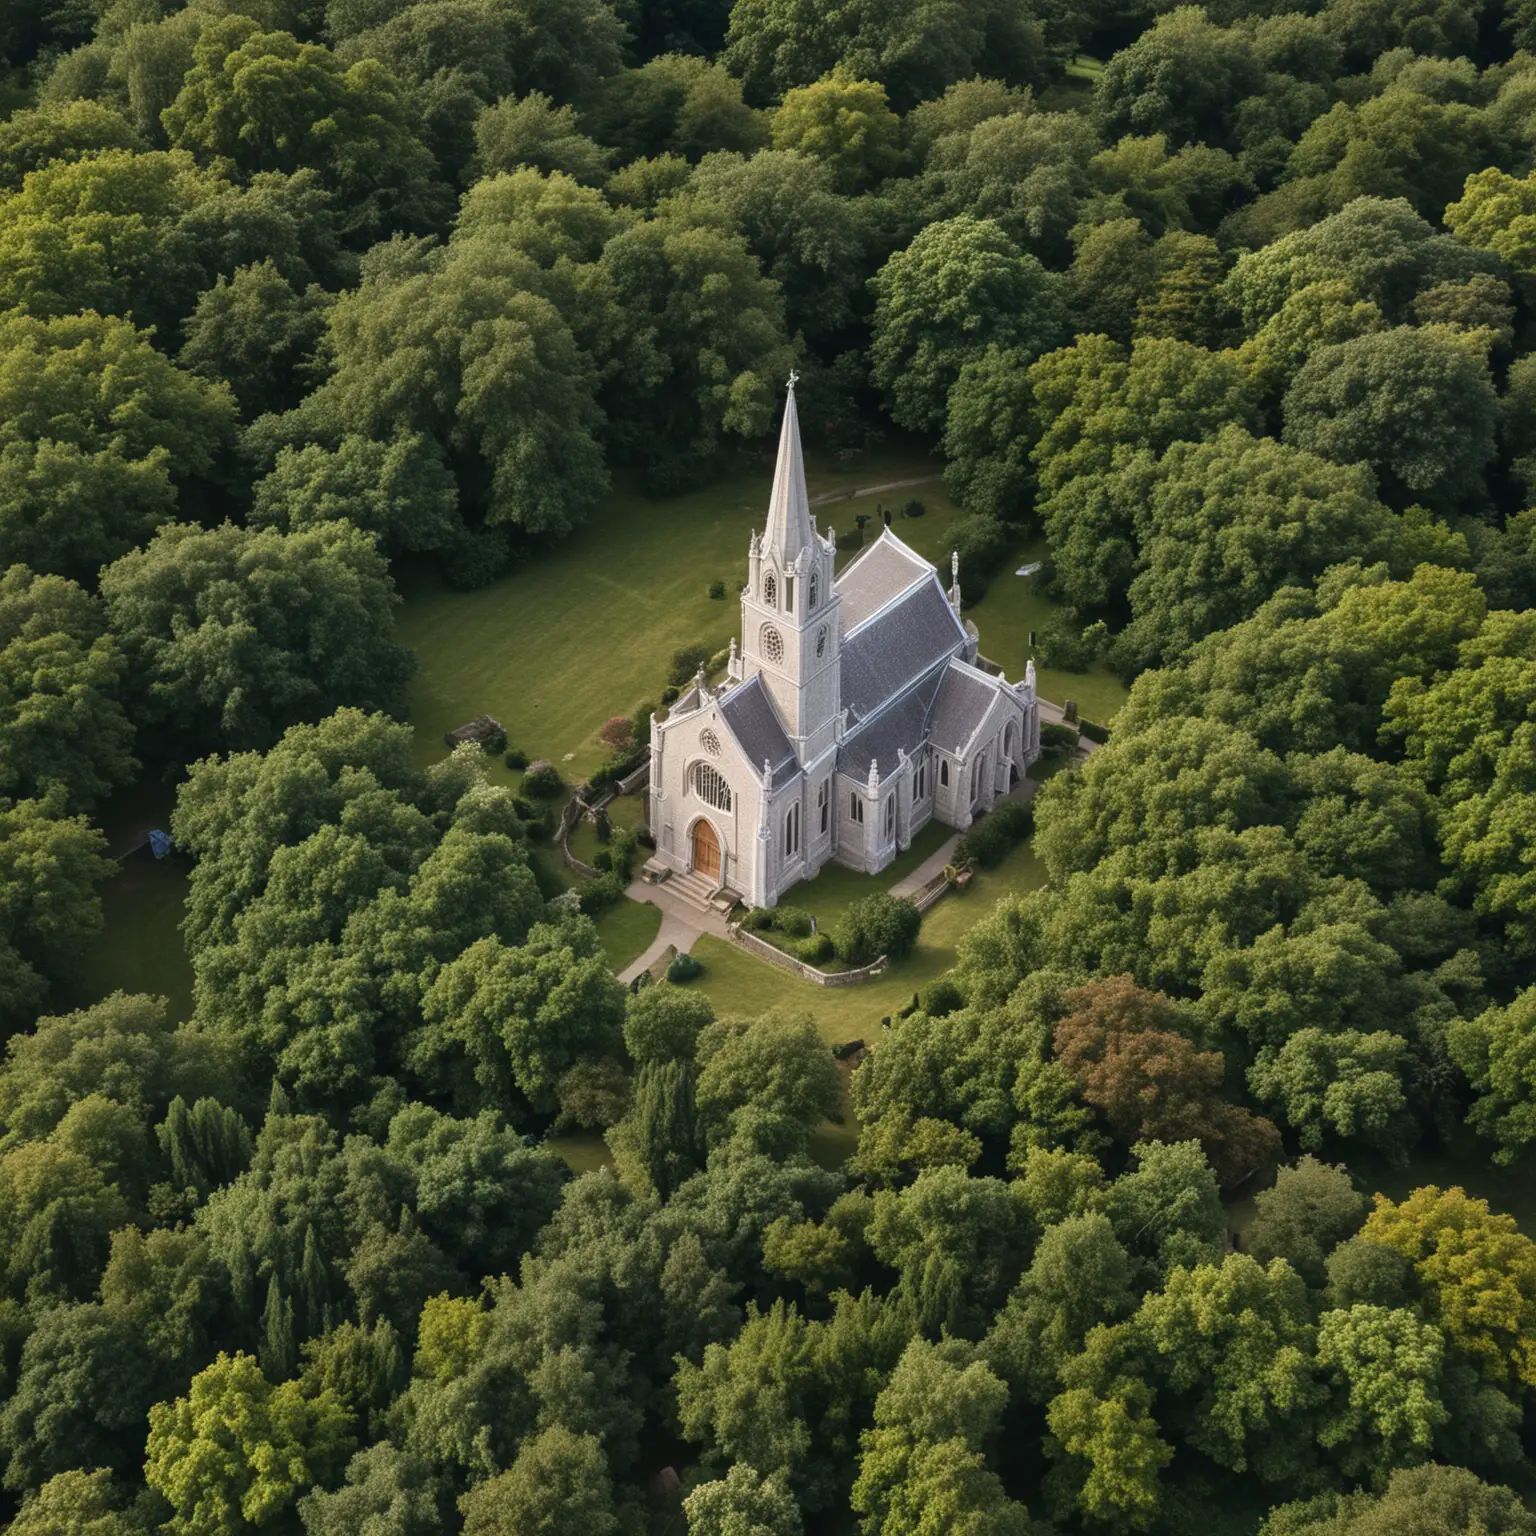 Tranquil Aerial View of a Small English Church Amidst Lush Trees